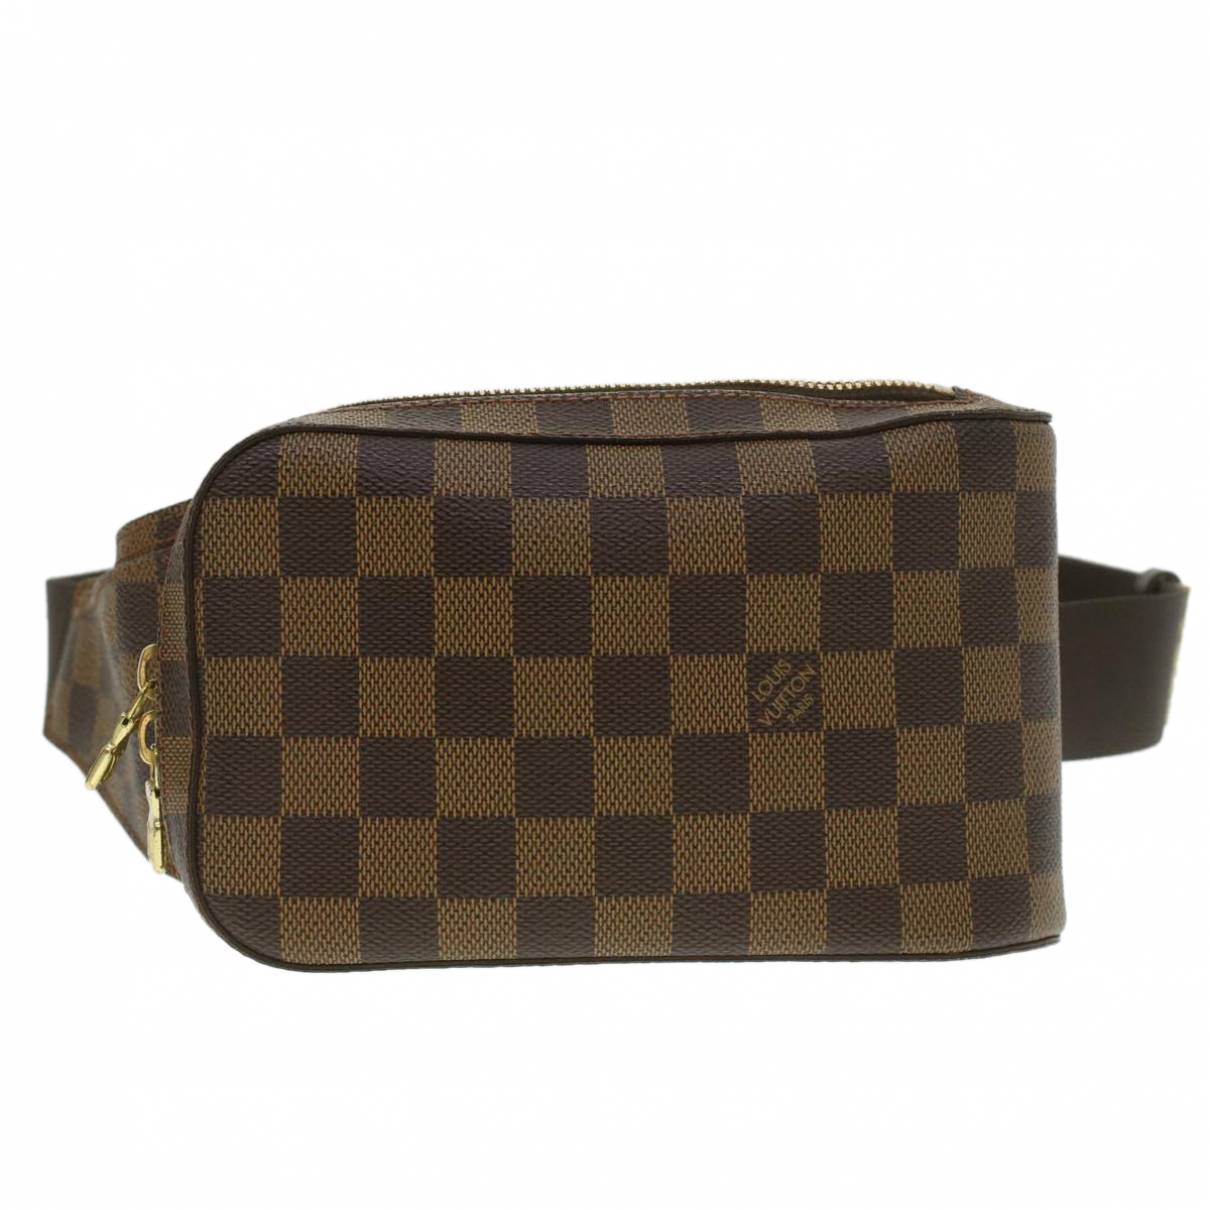 Louis Vuitton - Authenticated Geronimo Clutch Bag - Cloth Brown for Women, Very Good Condition